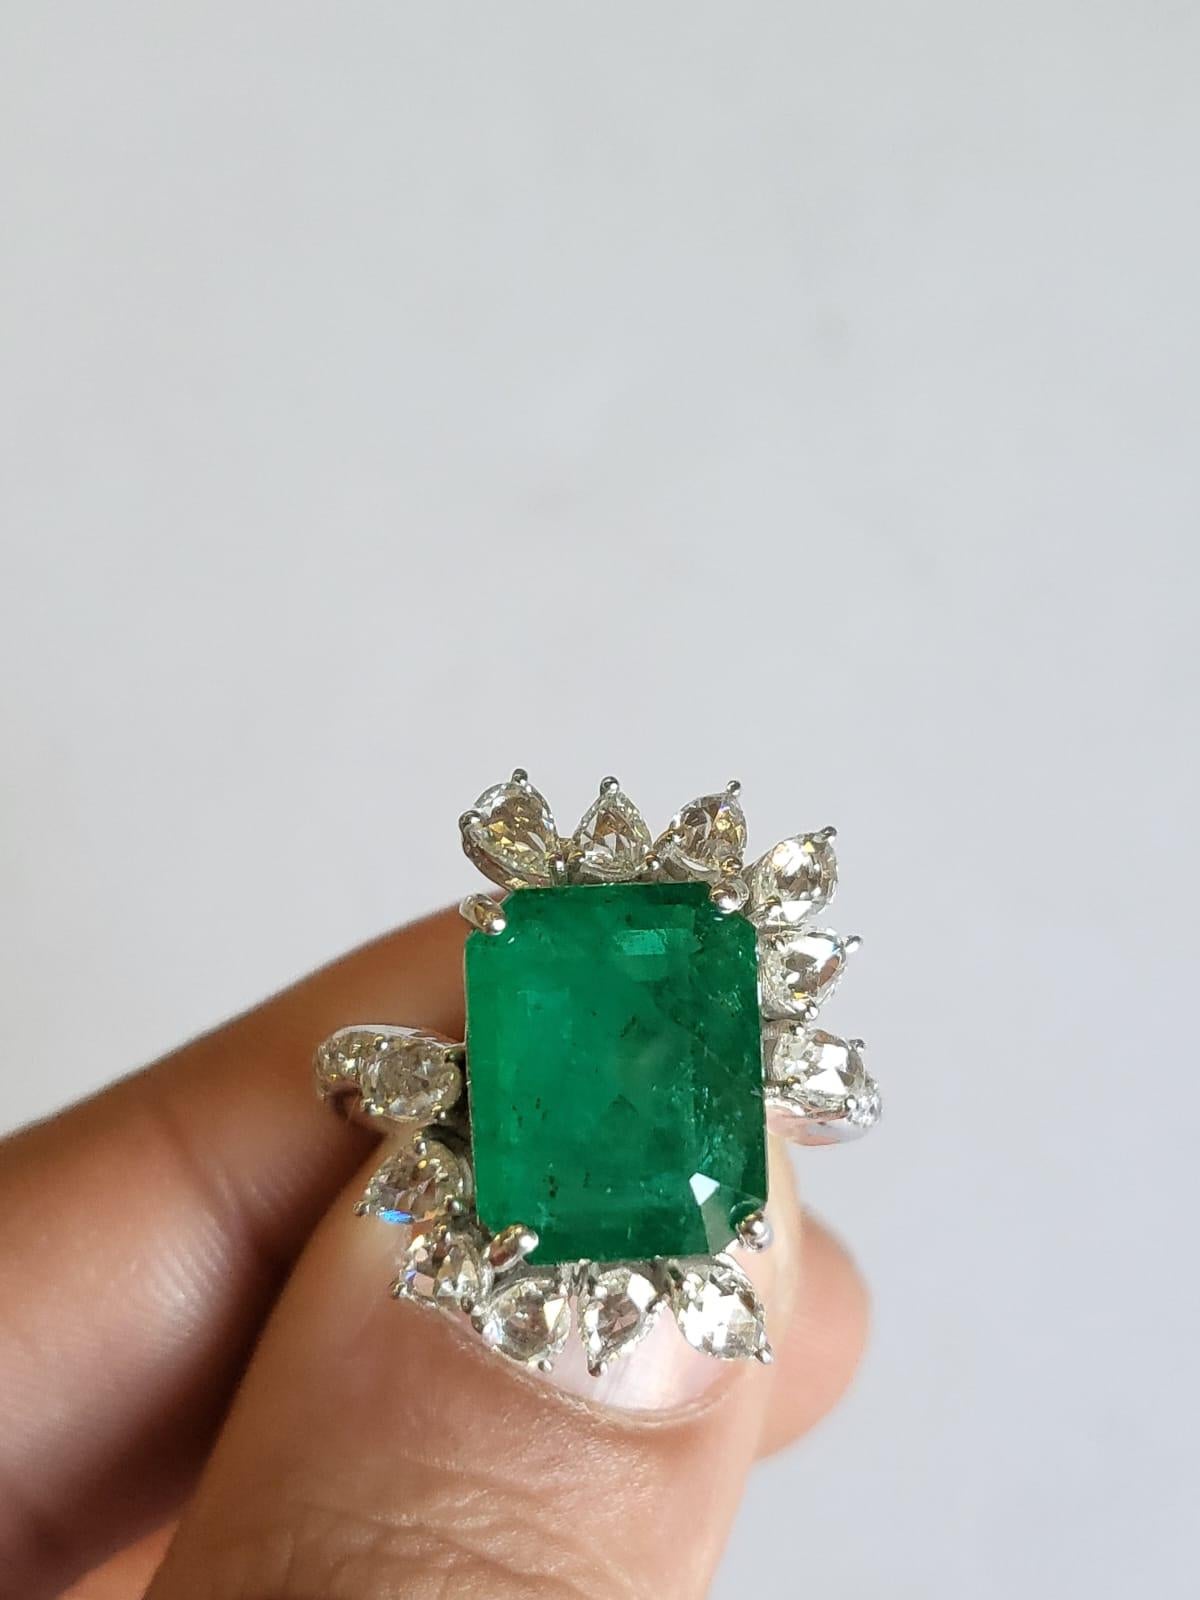 A very gorgeous and one of a kind, Emerald Cocktail / Engagement Ring set in 18K White Gold & Diamonds. The weight of the Emerald is 6.99 carats. The Emerald is completely natural, without any treatment & is of Zambian origin. The combined weight of